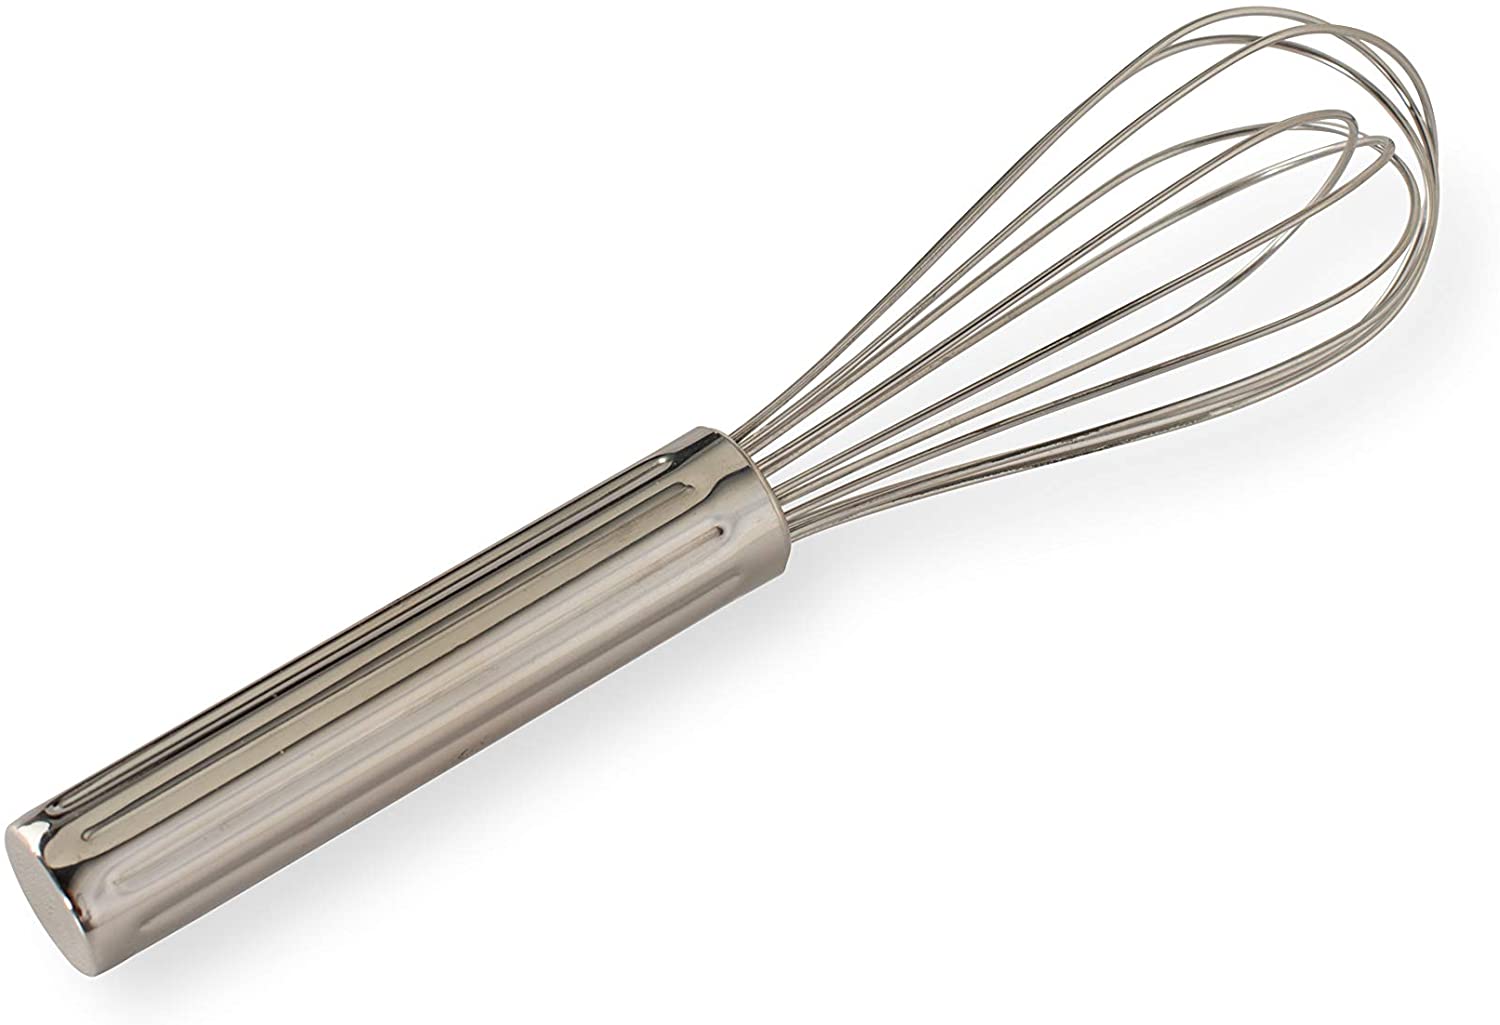 Nordic Ware Stainless Steel Whisk, 7 inch